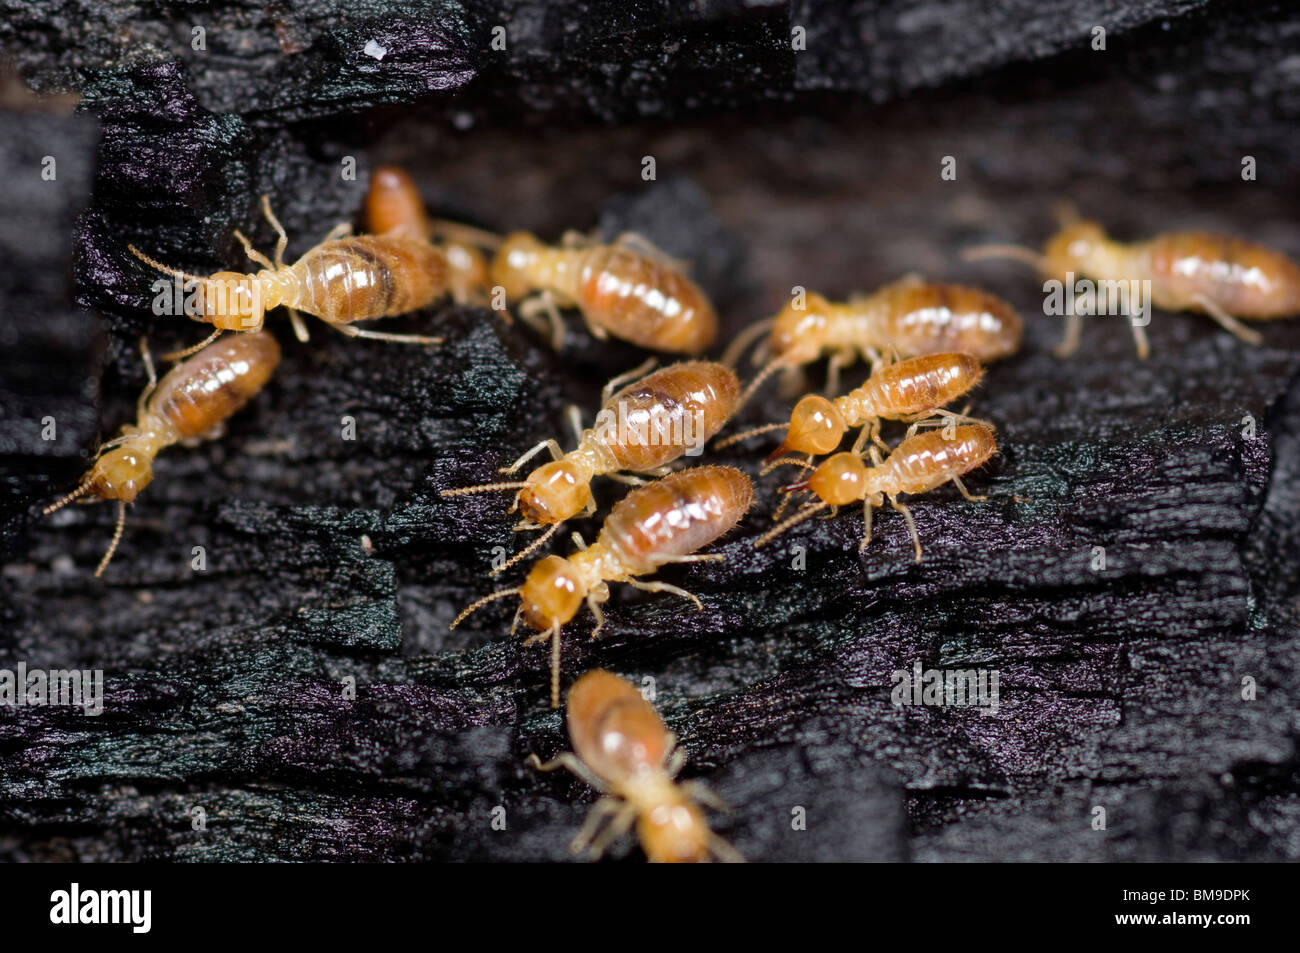 Australian termite workers and soldiers Stock Photo